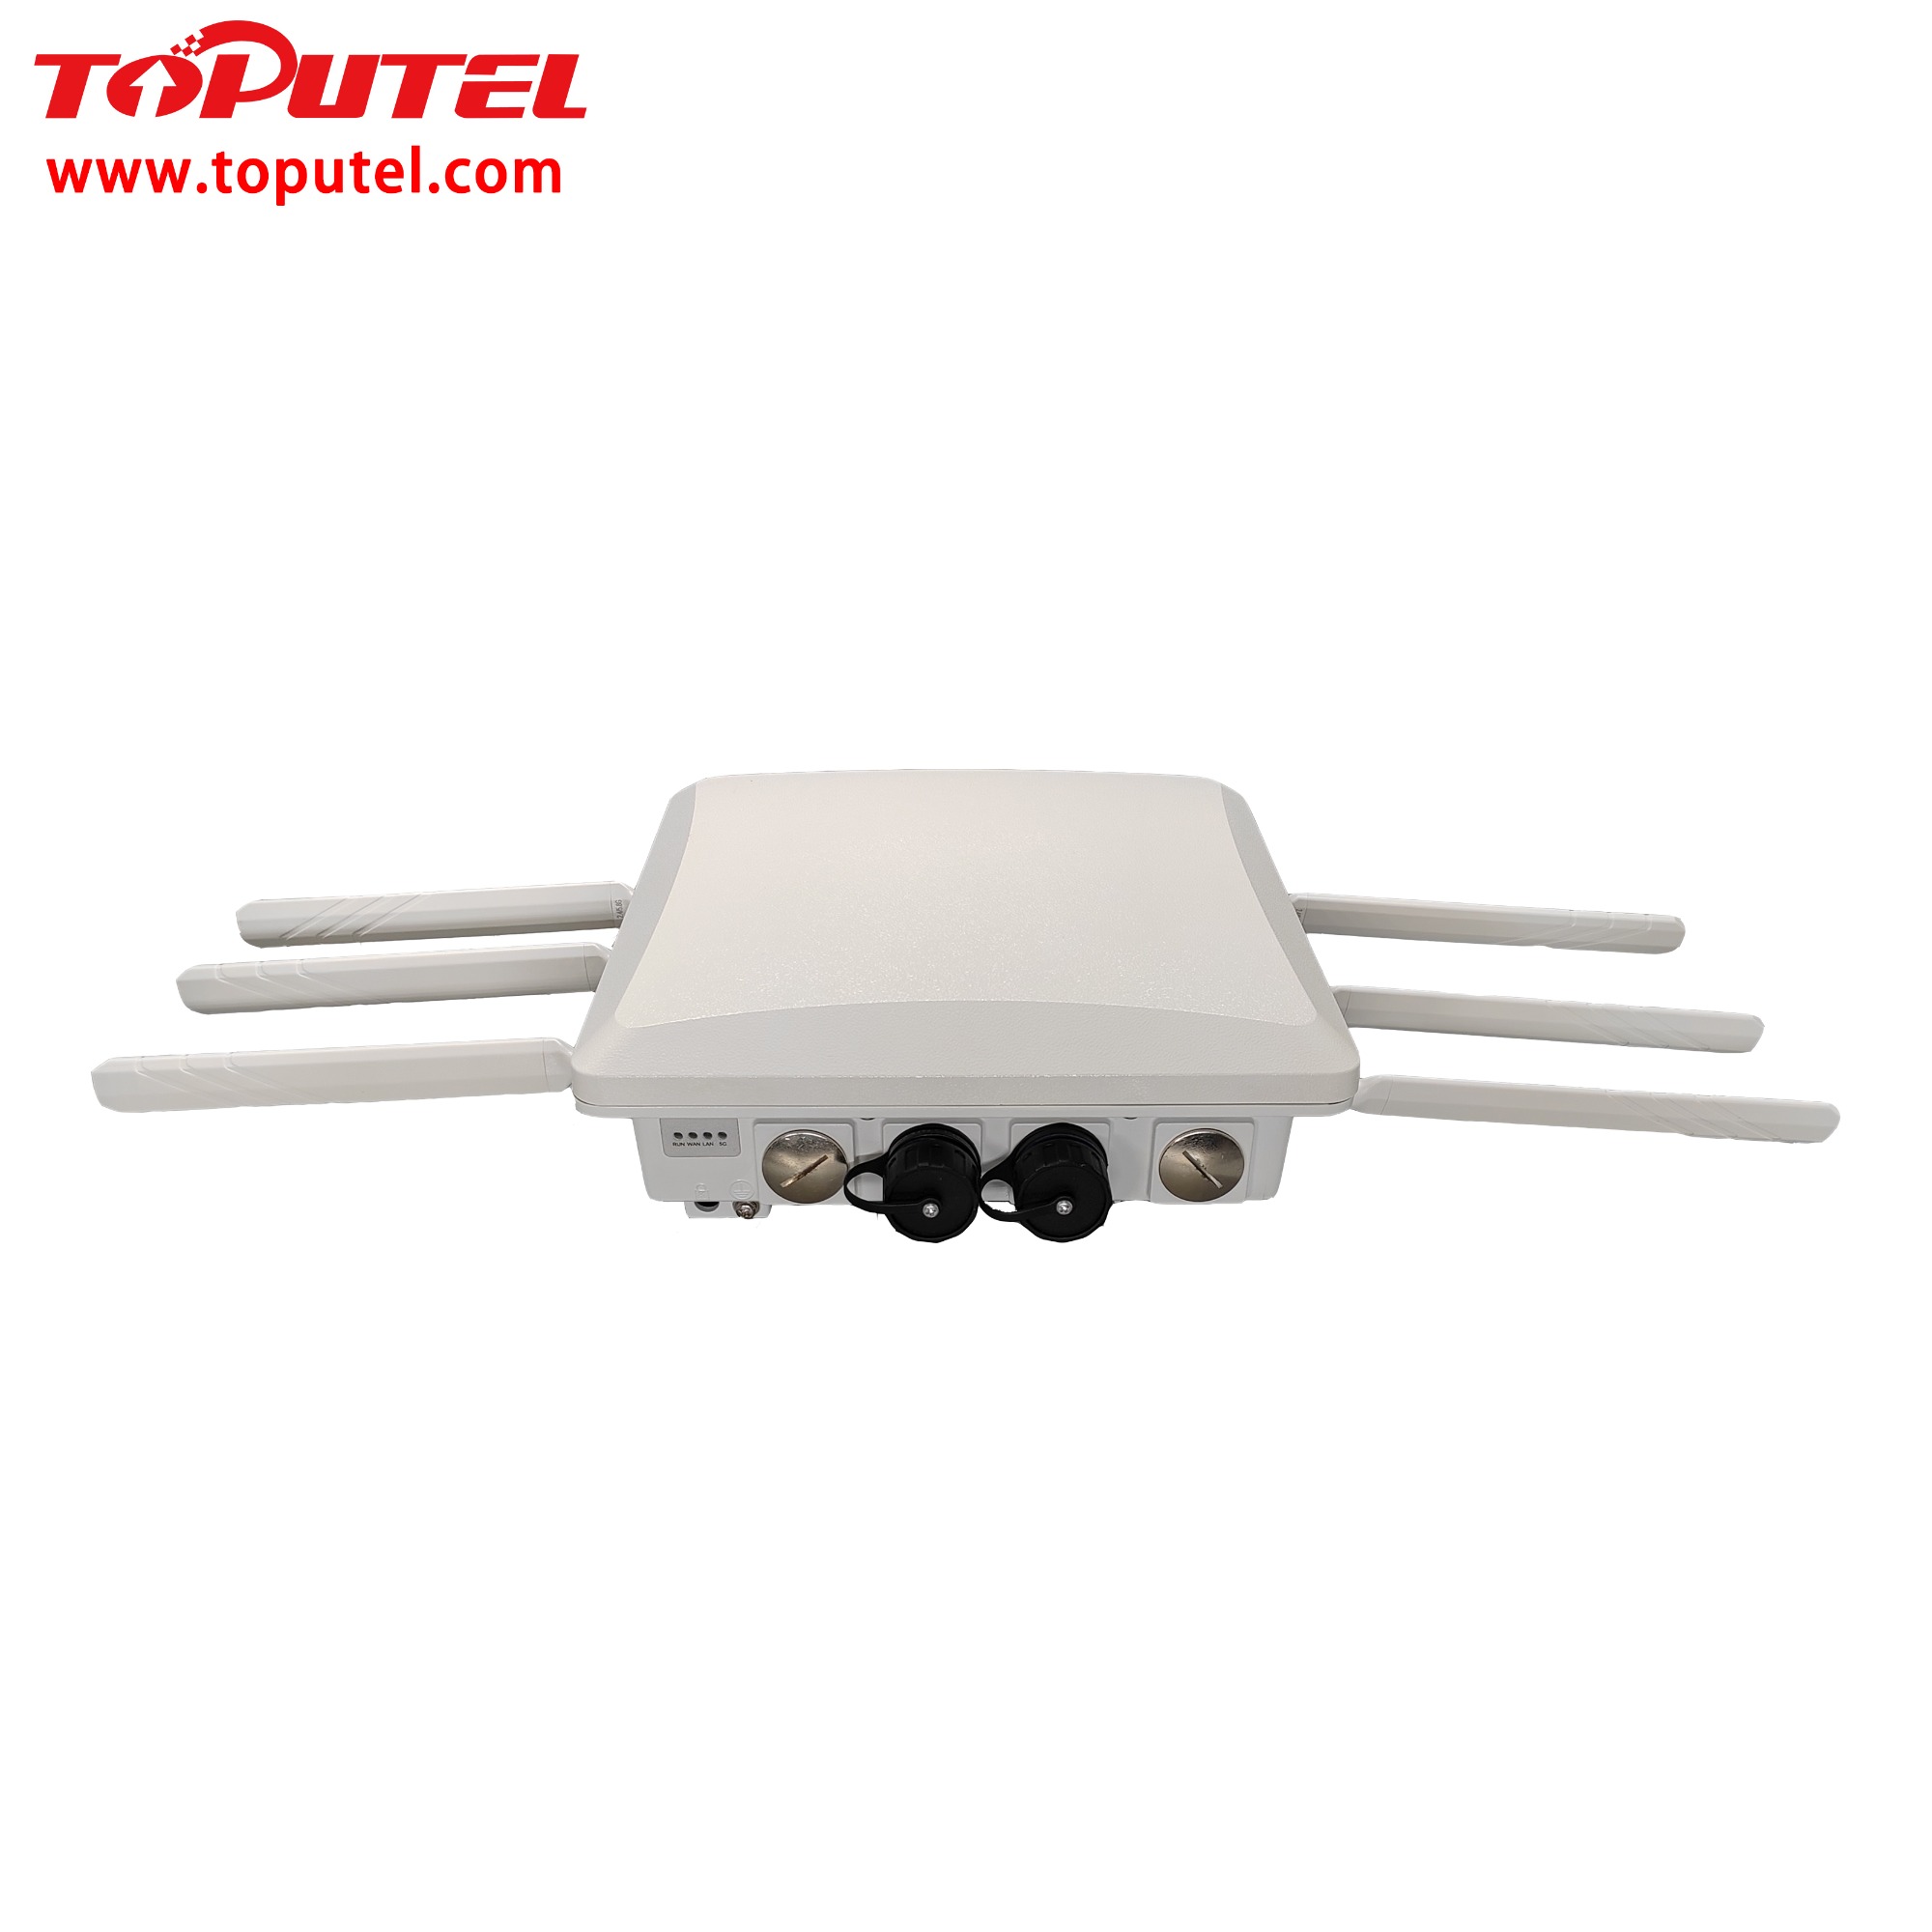 RG5000-OD industrial-grade 5G WiFi router particularly designed for outdoors use